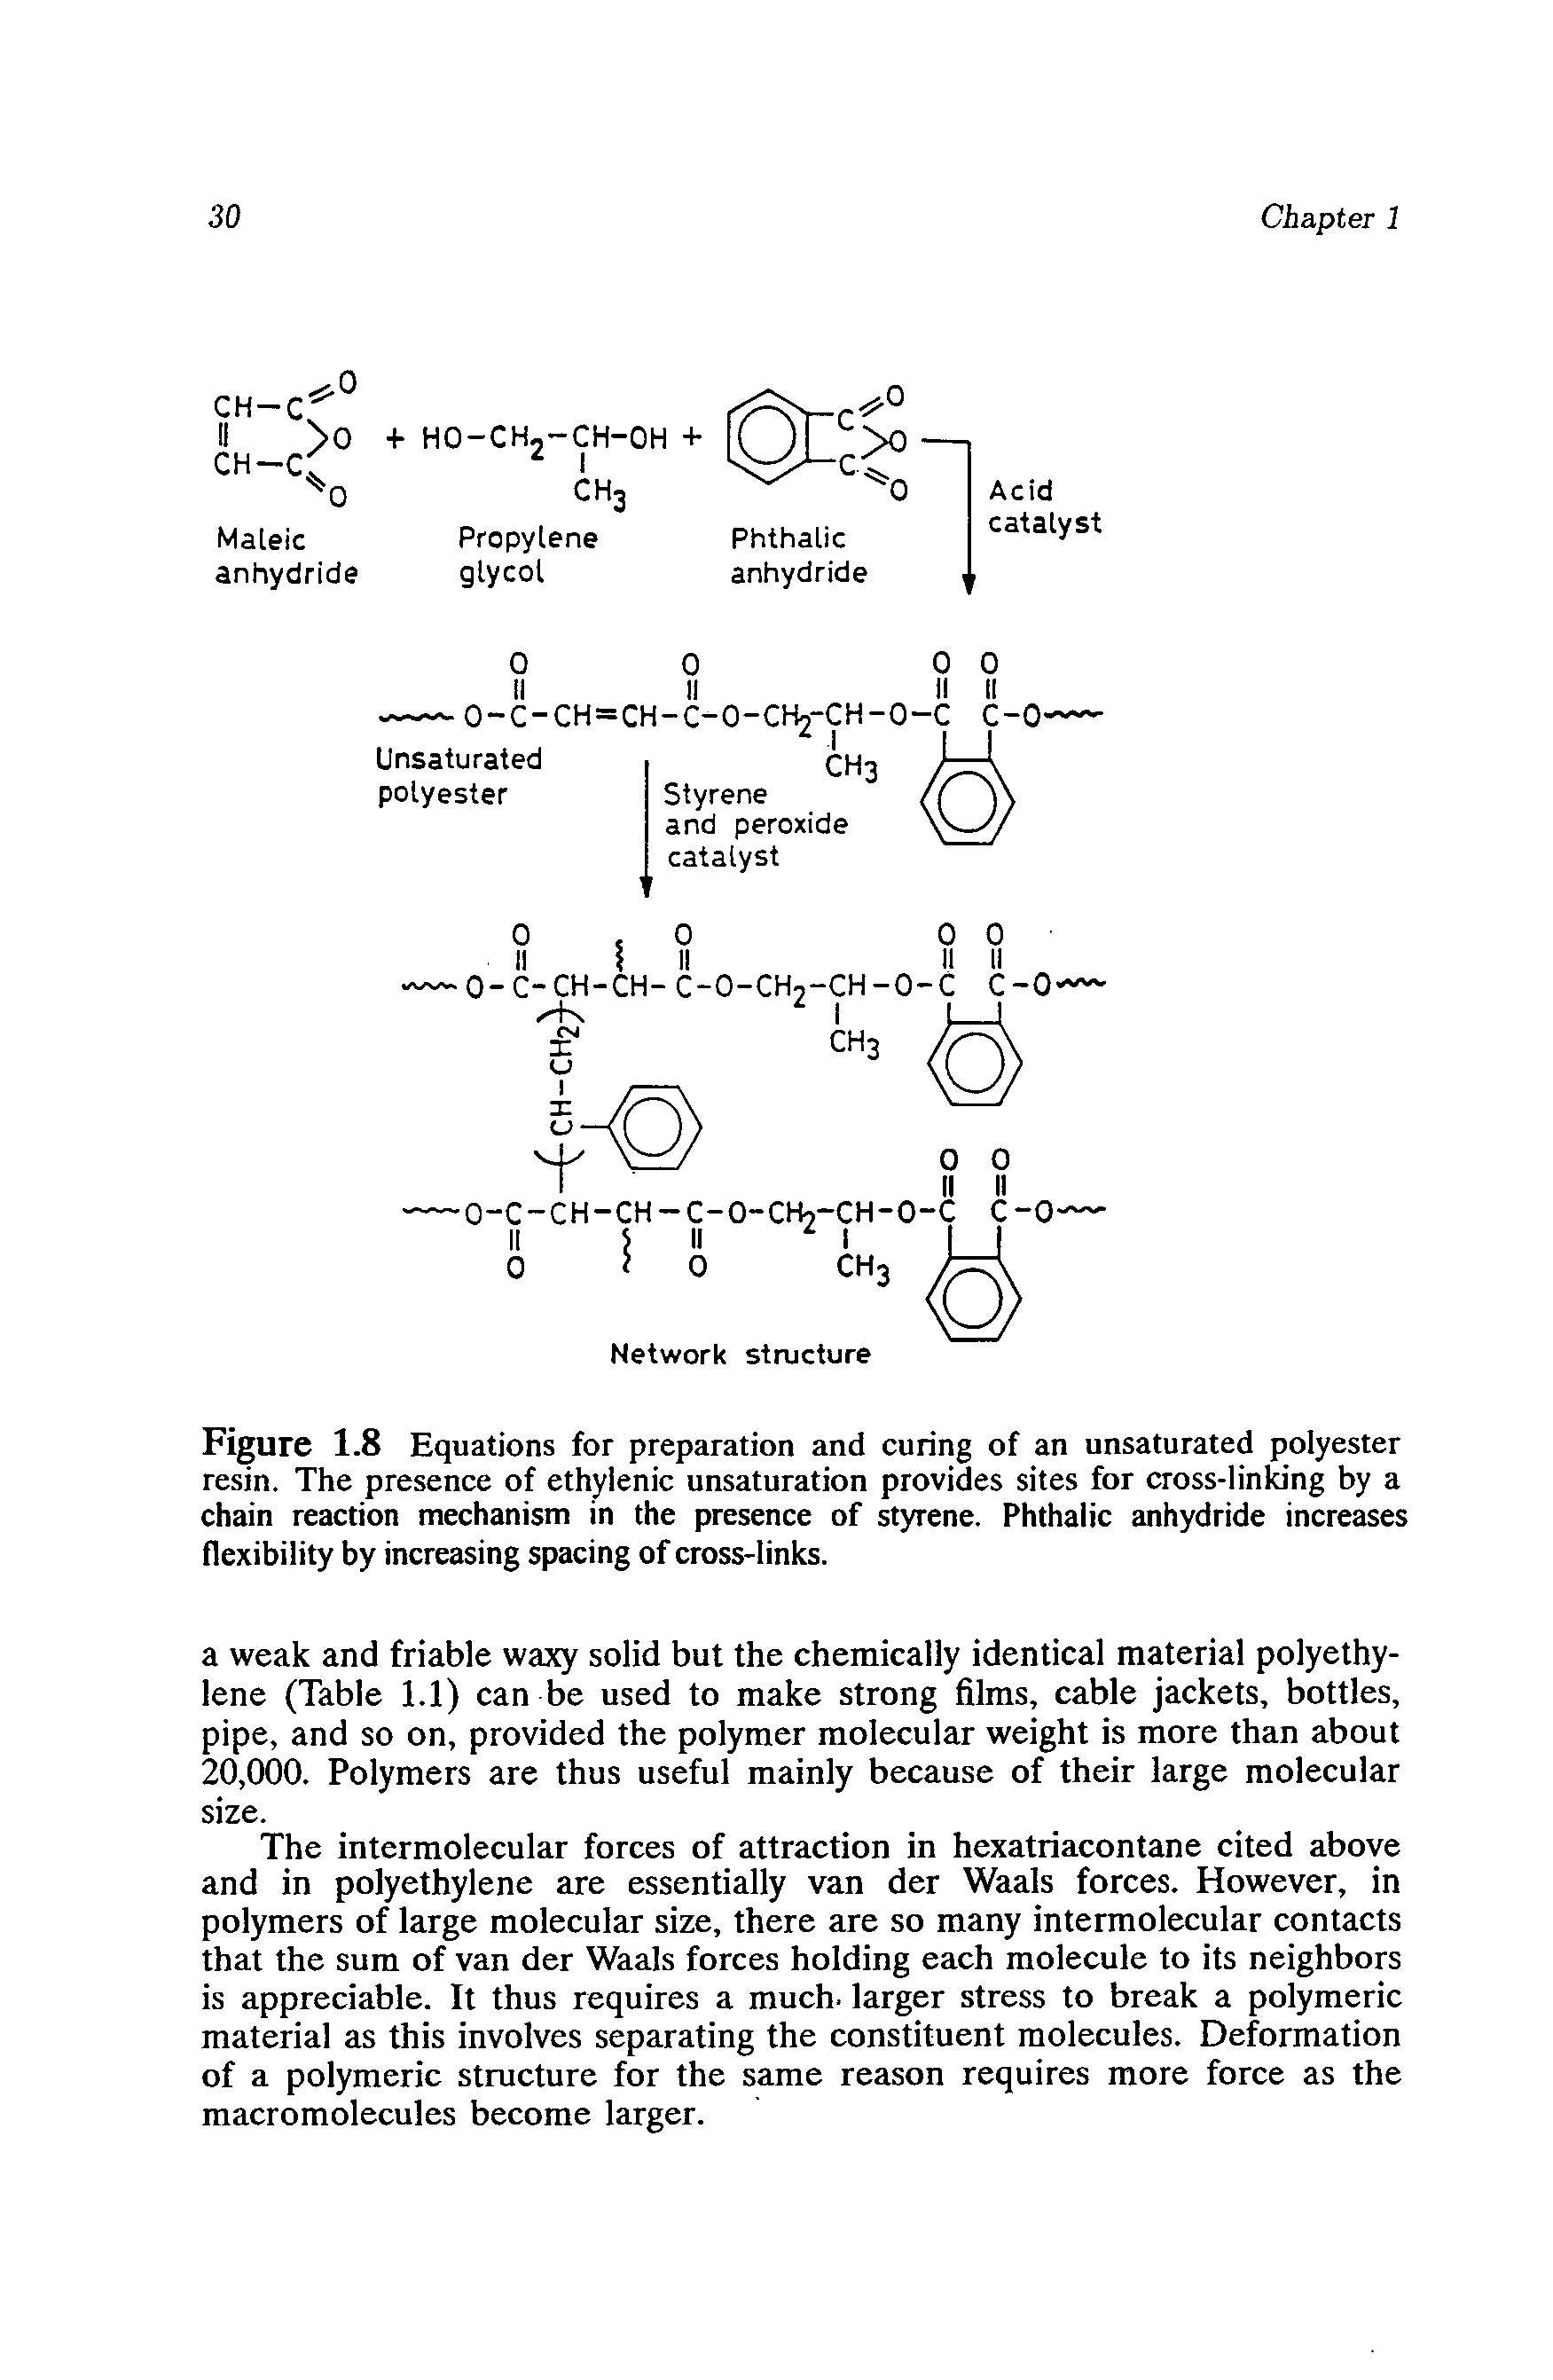 Figure 1.8 Equations for preparation and curing of an unsaturated polyester resin. The presence of ethylenic unsaturation provides sites for cross-linlang by a chain reaction mechanism in the presence of styrene. Phthalic anhydride increases flexibility by increasing spacing of cross-links.